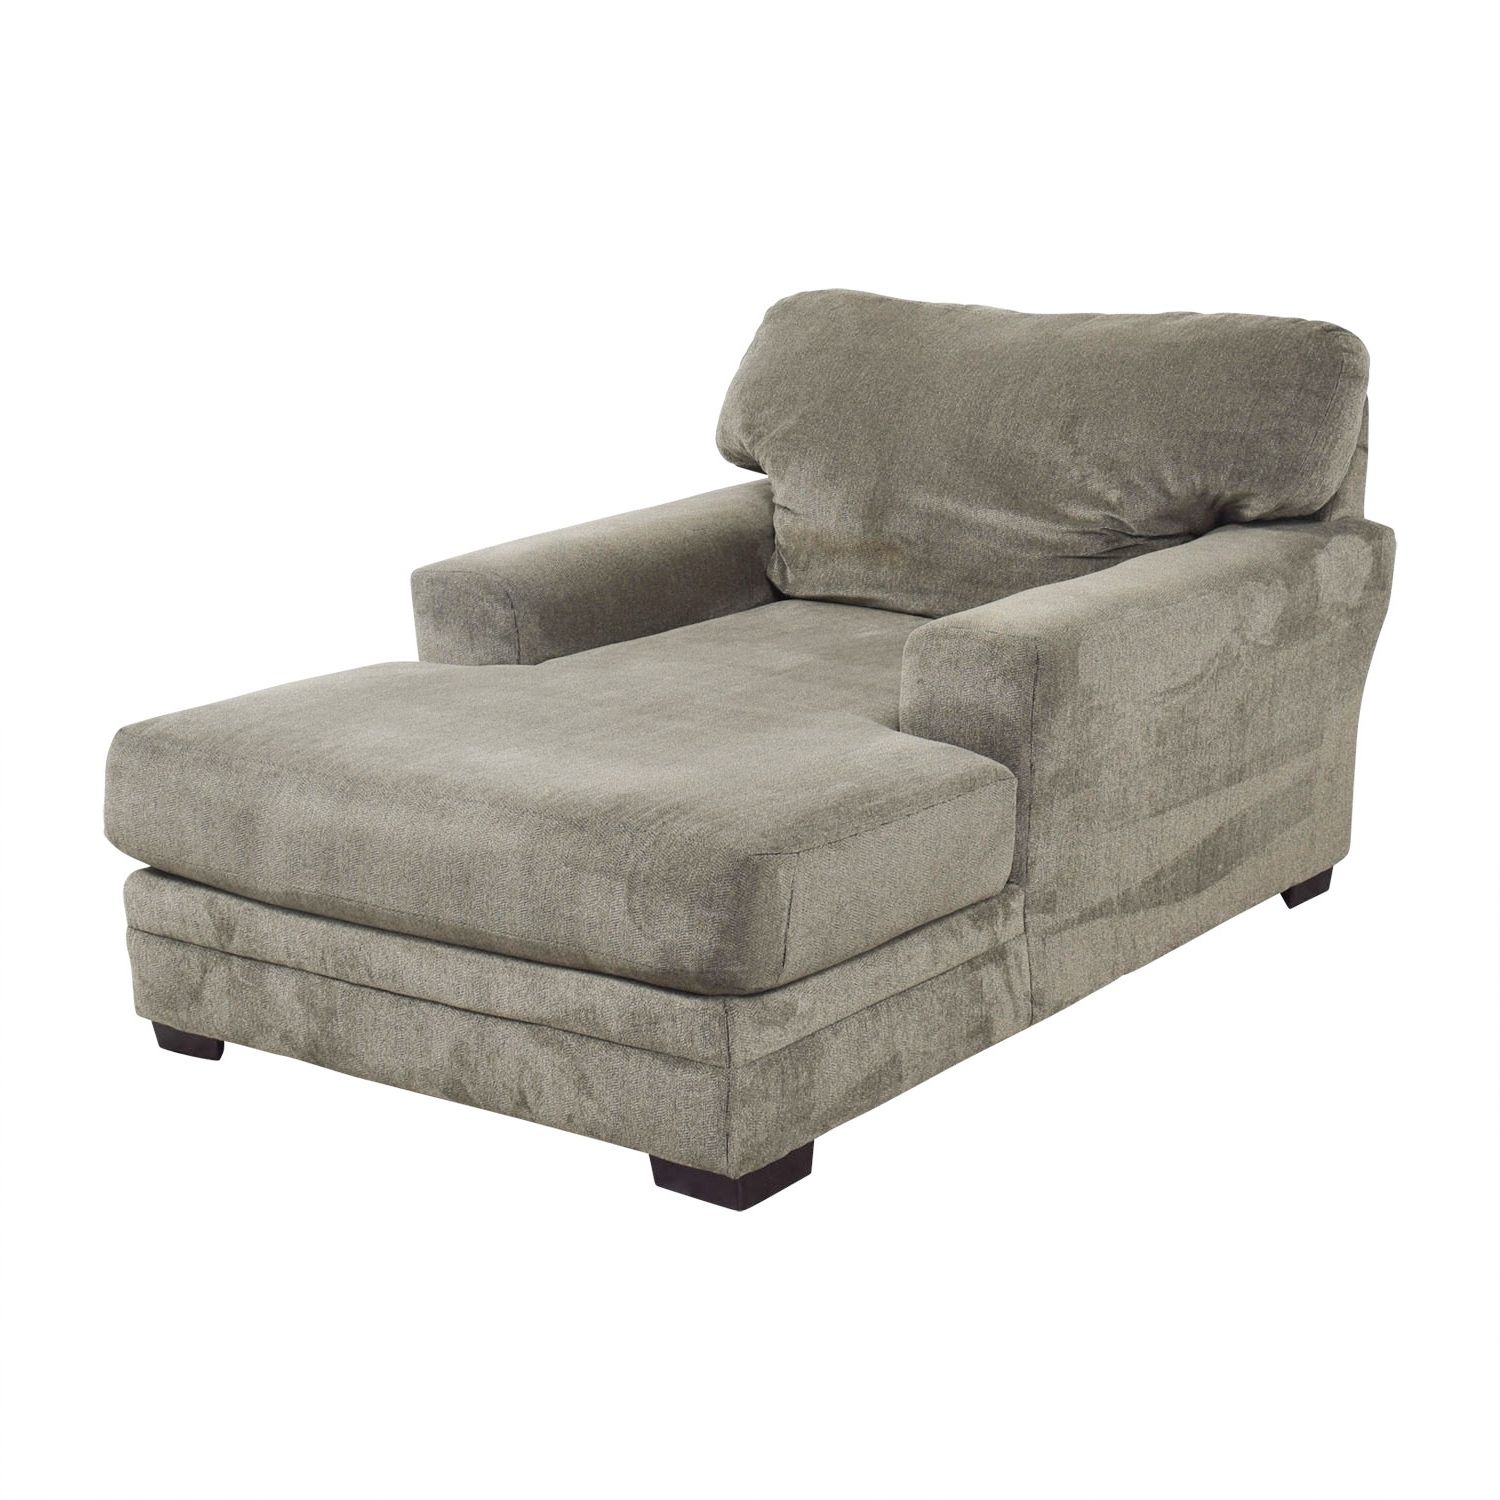 [%81% Off – Bob's Furniture Bob's Furniture Grey Chaise Lounge / Sofas For Current Grey Chaises|grey Chaises Within Recent 81% Off – Bob's Furniture Bob's Furniture Grey Chaise Lounge / Sofas|2018 Grey Chaises In 81% Off – Bob's Furniture Bob's Furniture Grey Chaise Lounge / Sofas|2017 81% Off – Bob's Furniture Bob's Furniture Grey Chaise Lounge / Sofas Pertaining To Grey Chaises%] (Photo 1 of 15)